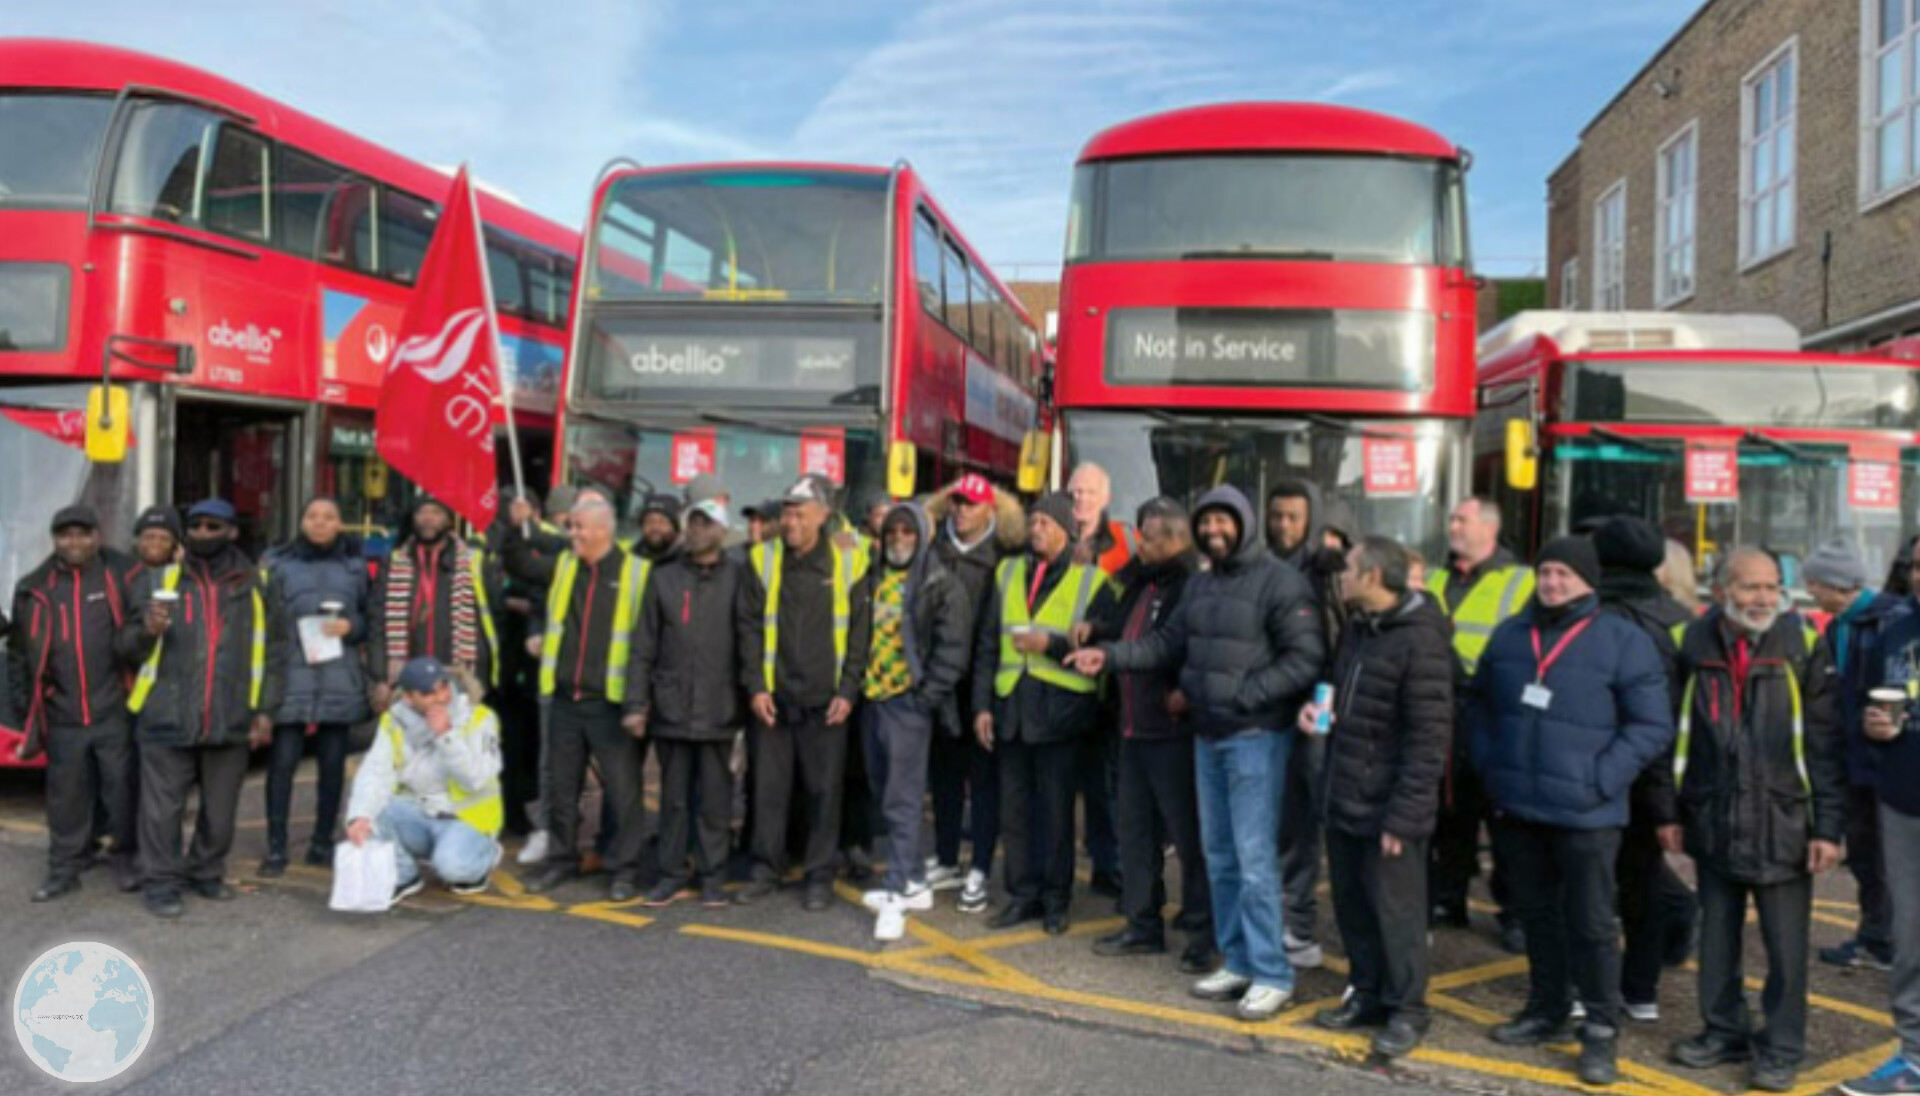 Bus Drivers in Britain have Rejected new Pay Offers and Called for a Strike